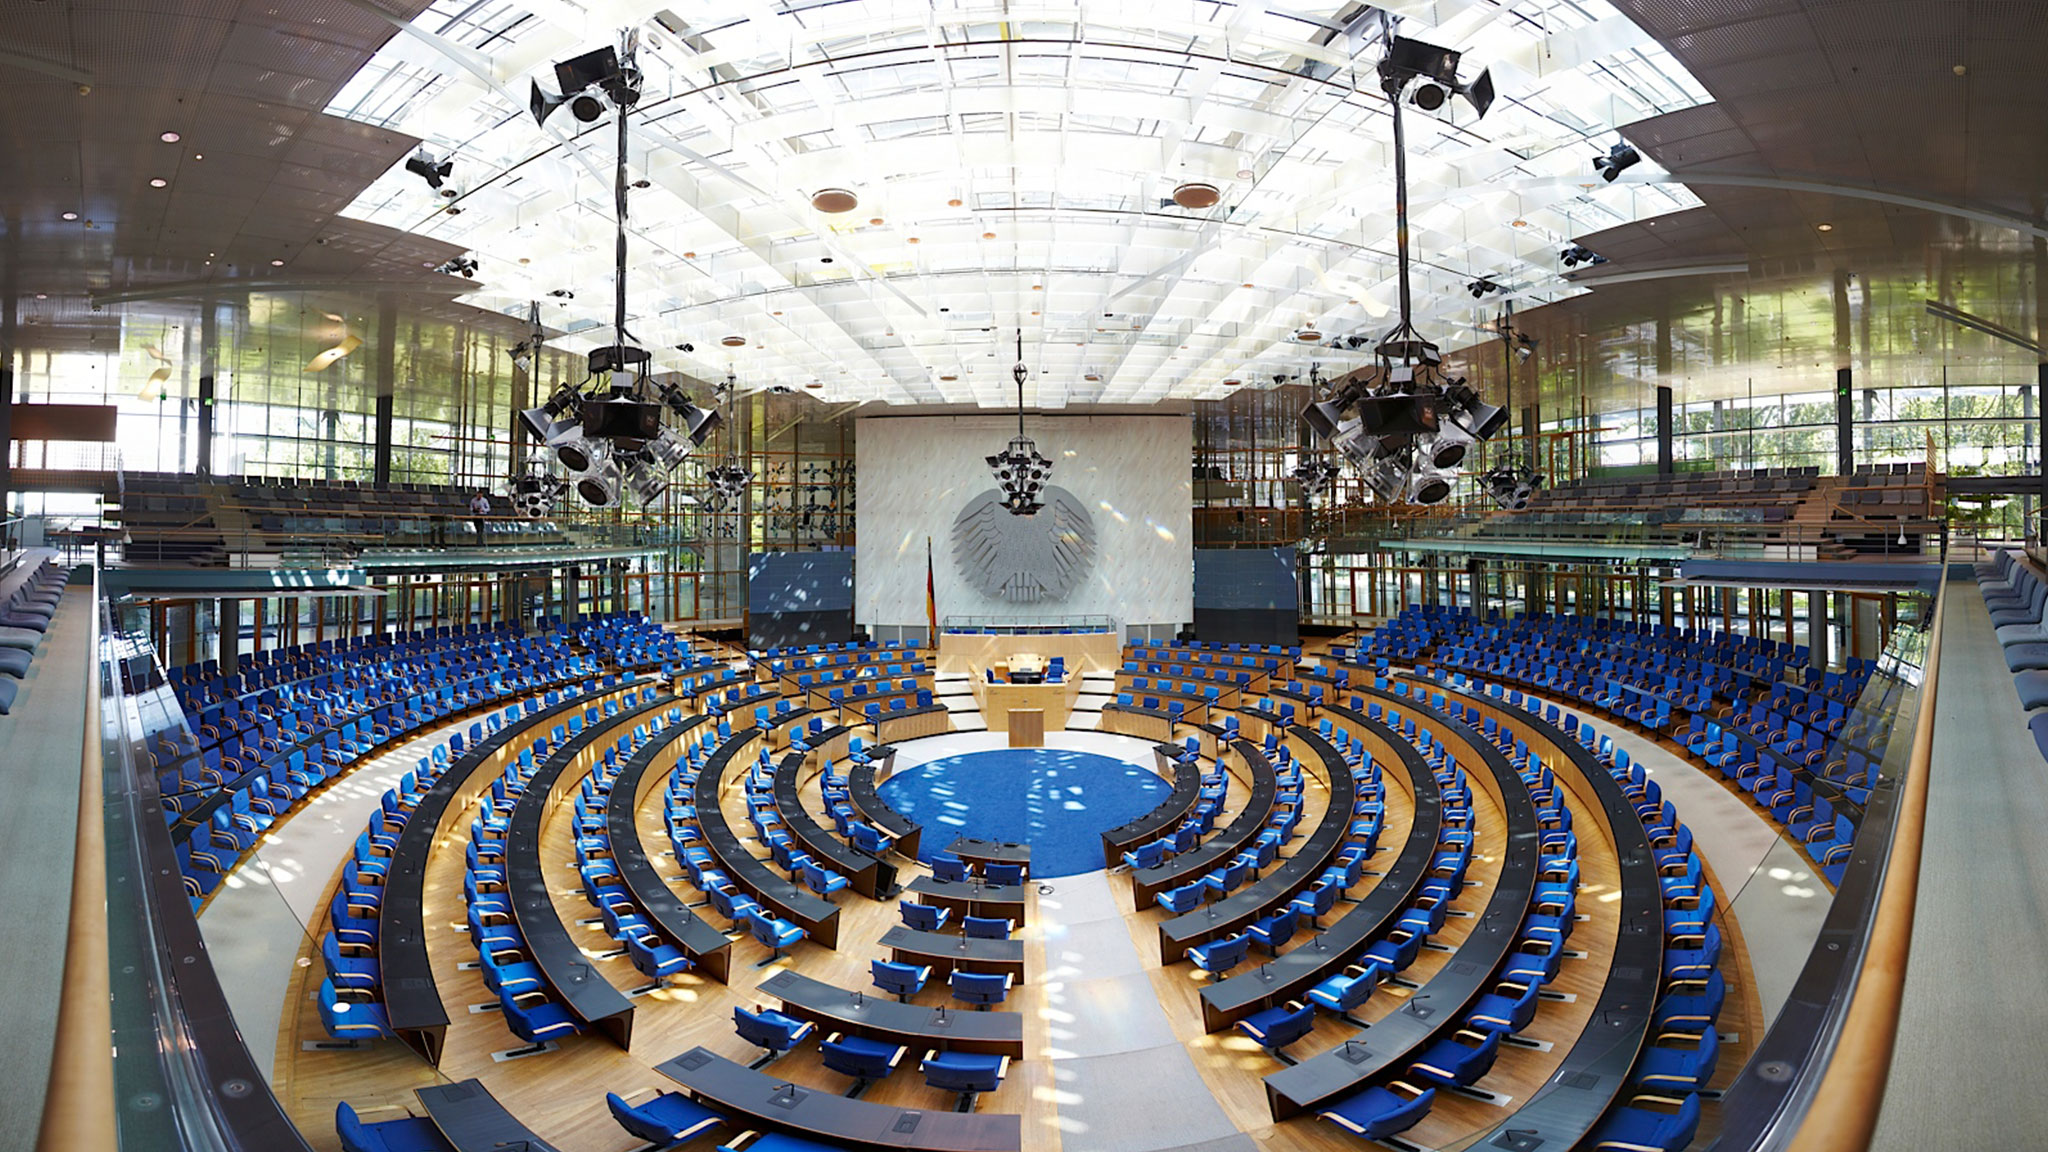 Seat movement system from Trendelkakmp at the German Bundestag.